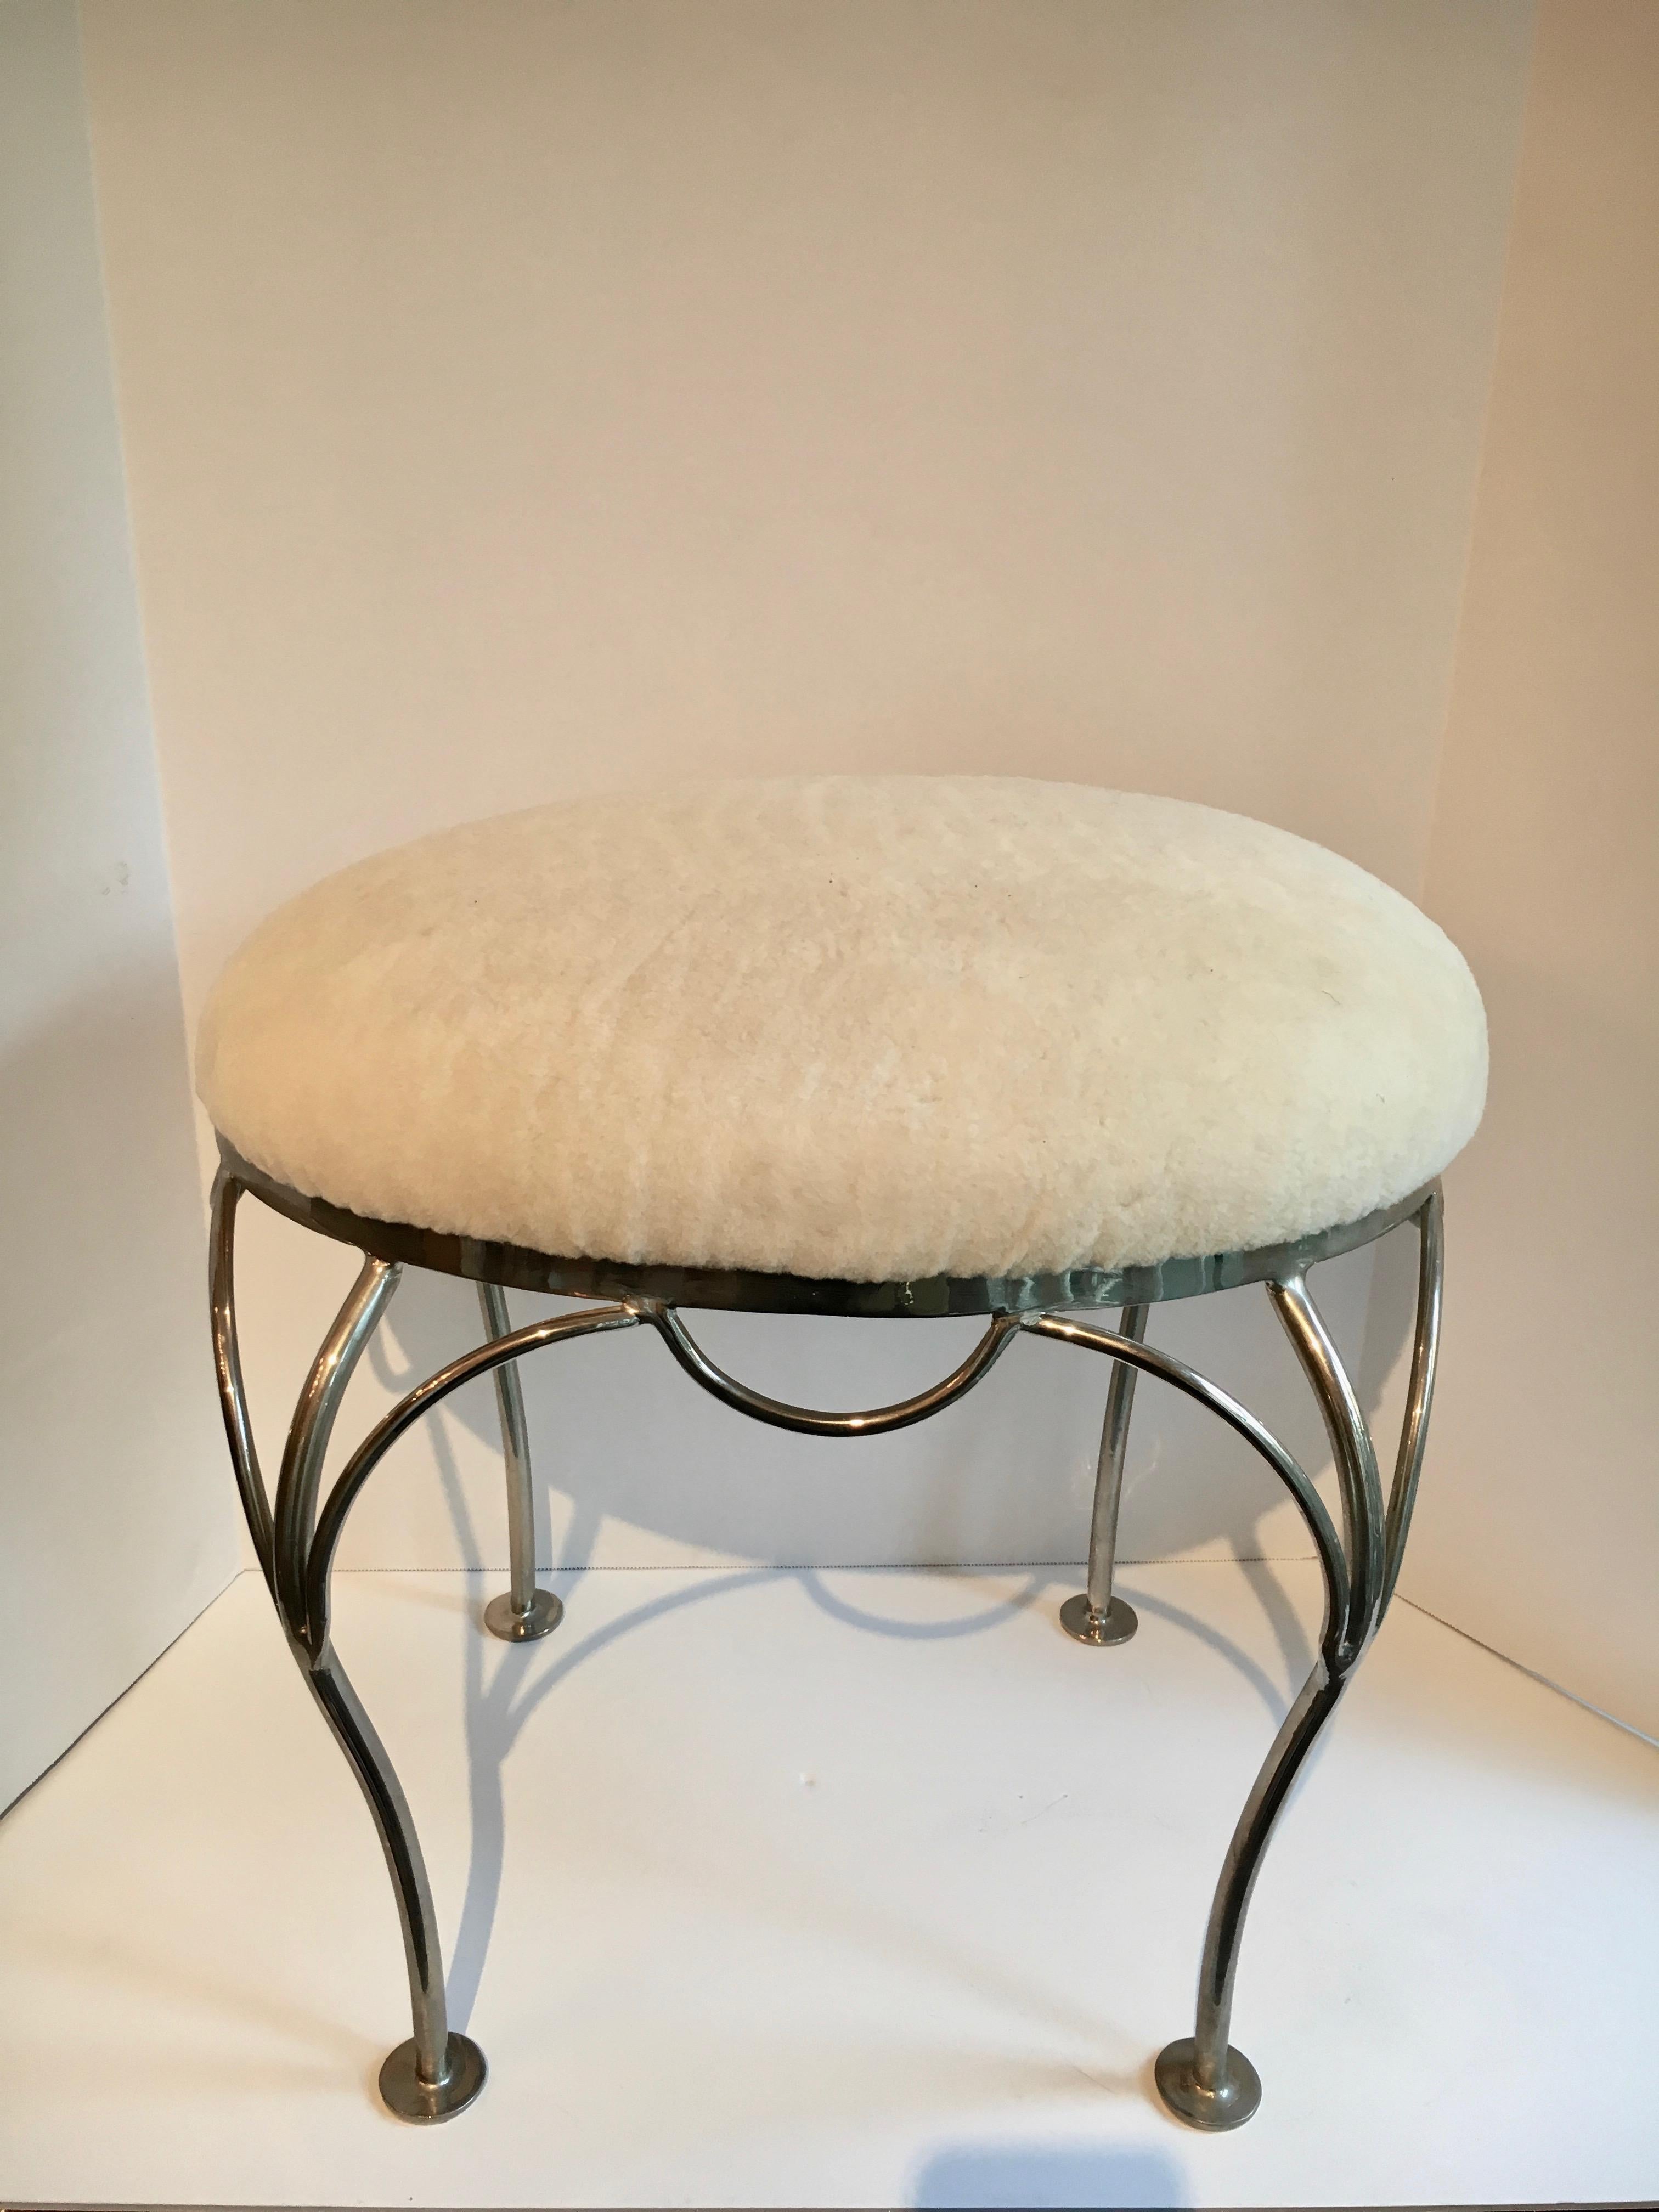 Nickel-plated vanity stool with shearling seat, simple and elegant. A great addition to any vanity or bedroom.